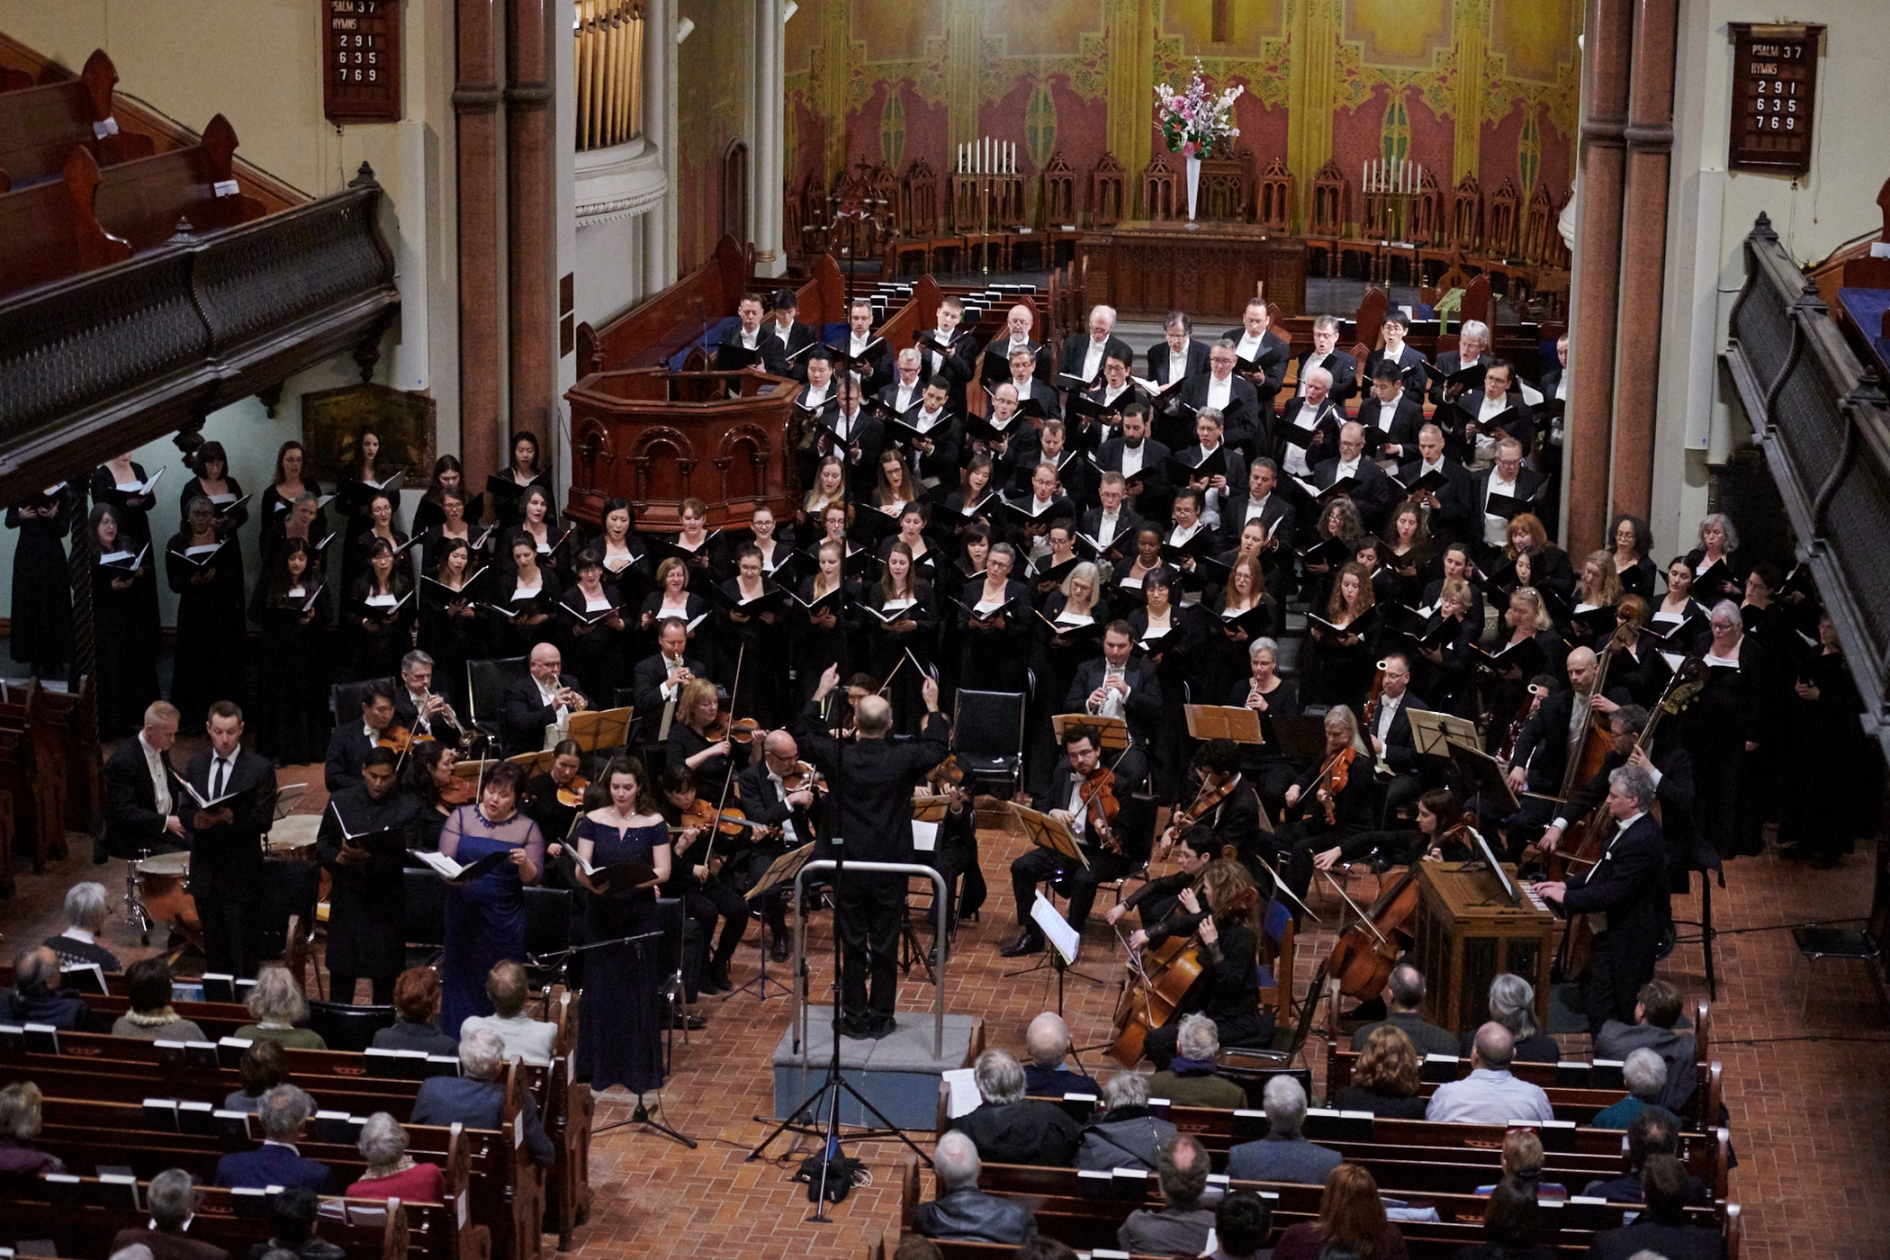 TMChoir performs a program of Handel and Haydn with orchestra and soloists at St. Andrew's Church., under conductor David Fallis. Photo by Brian Summers.